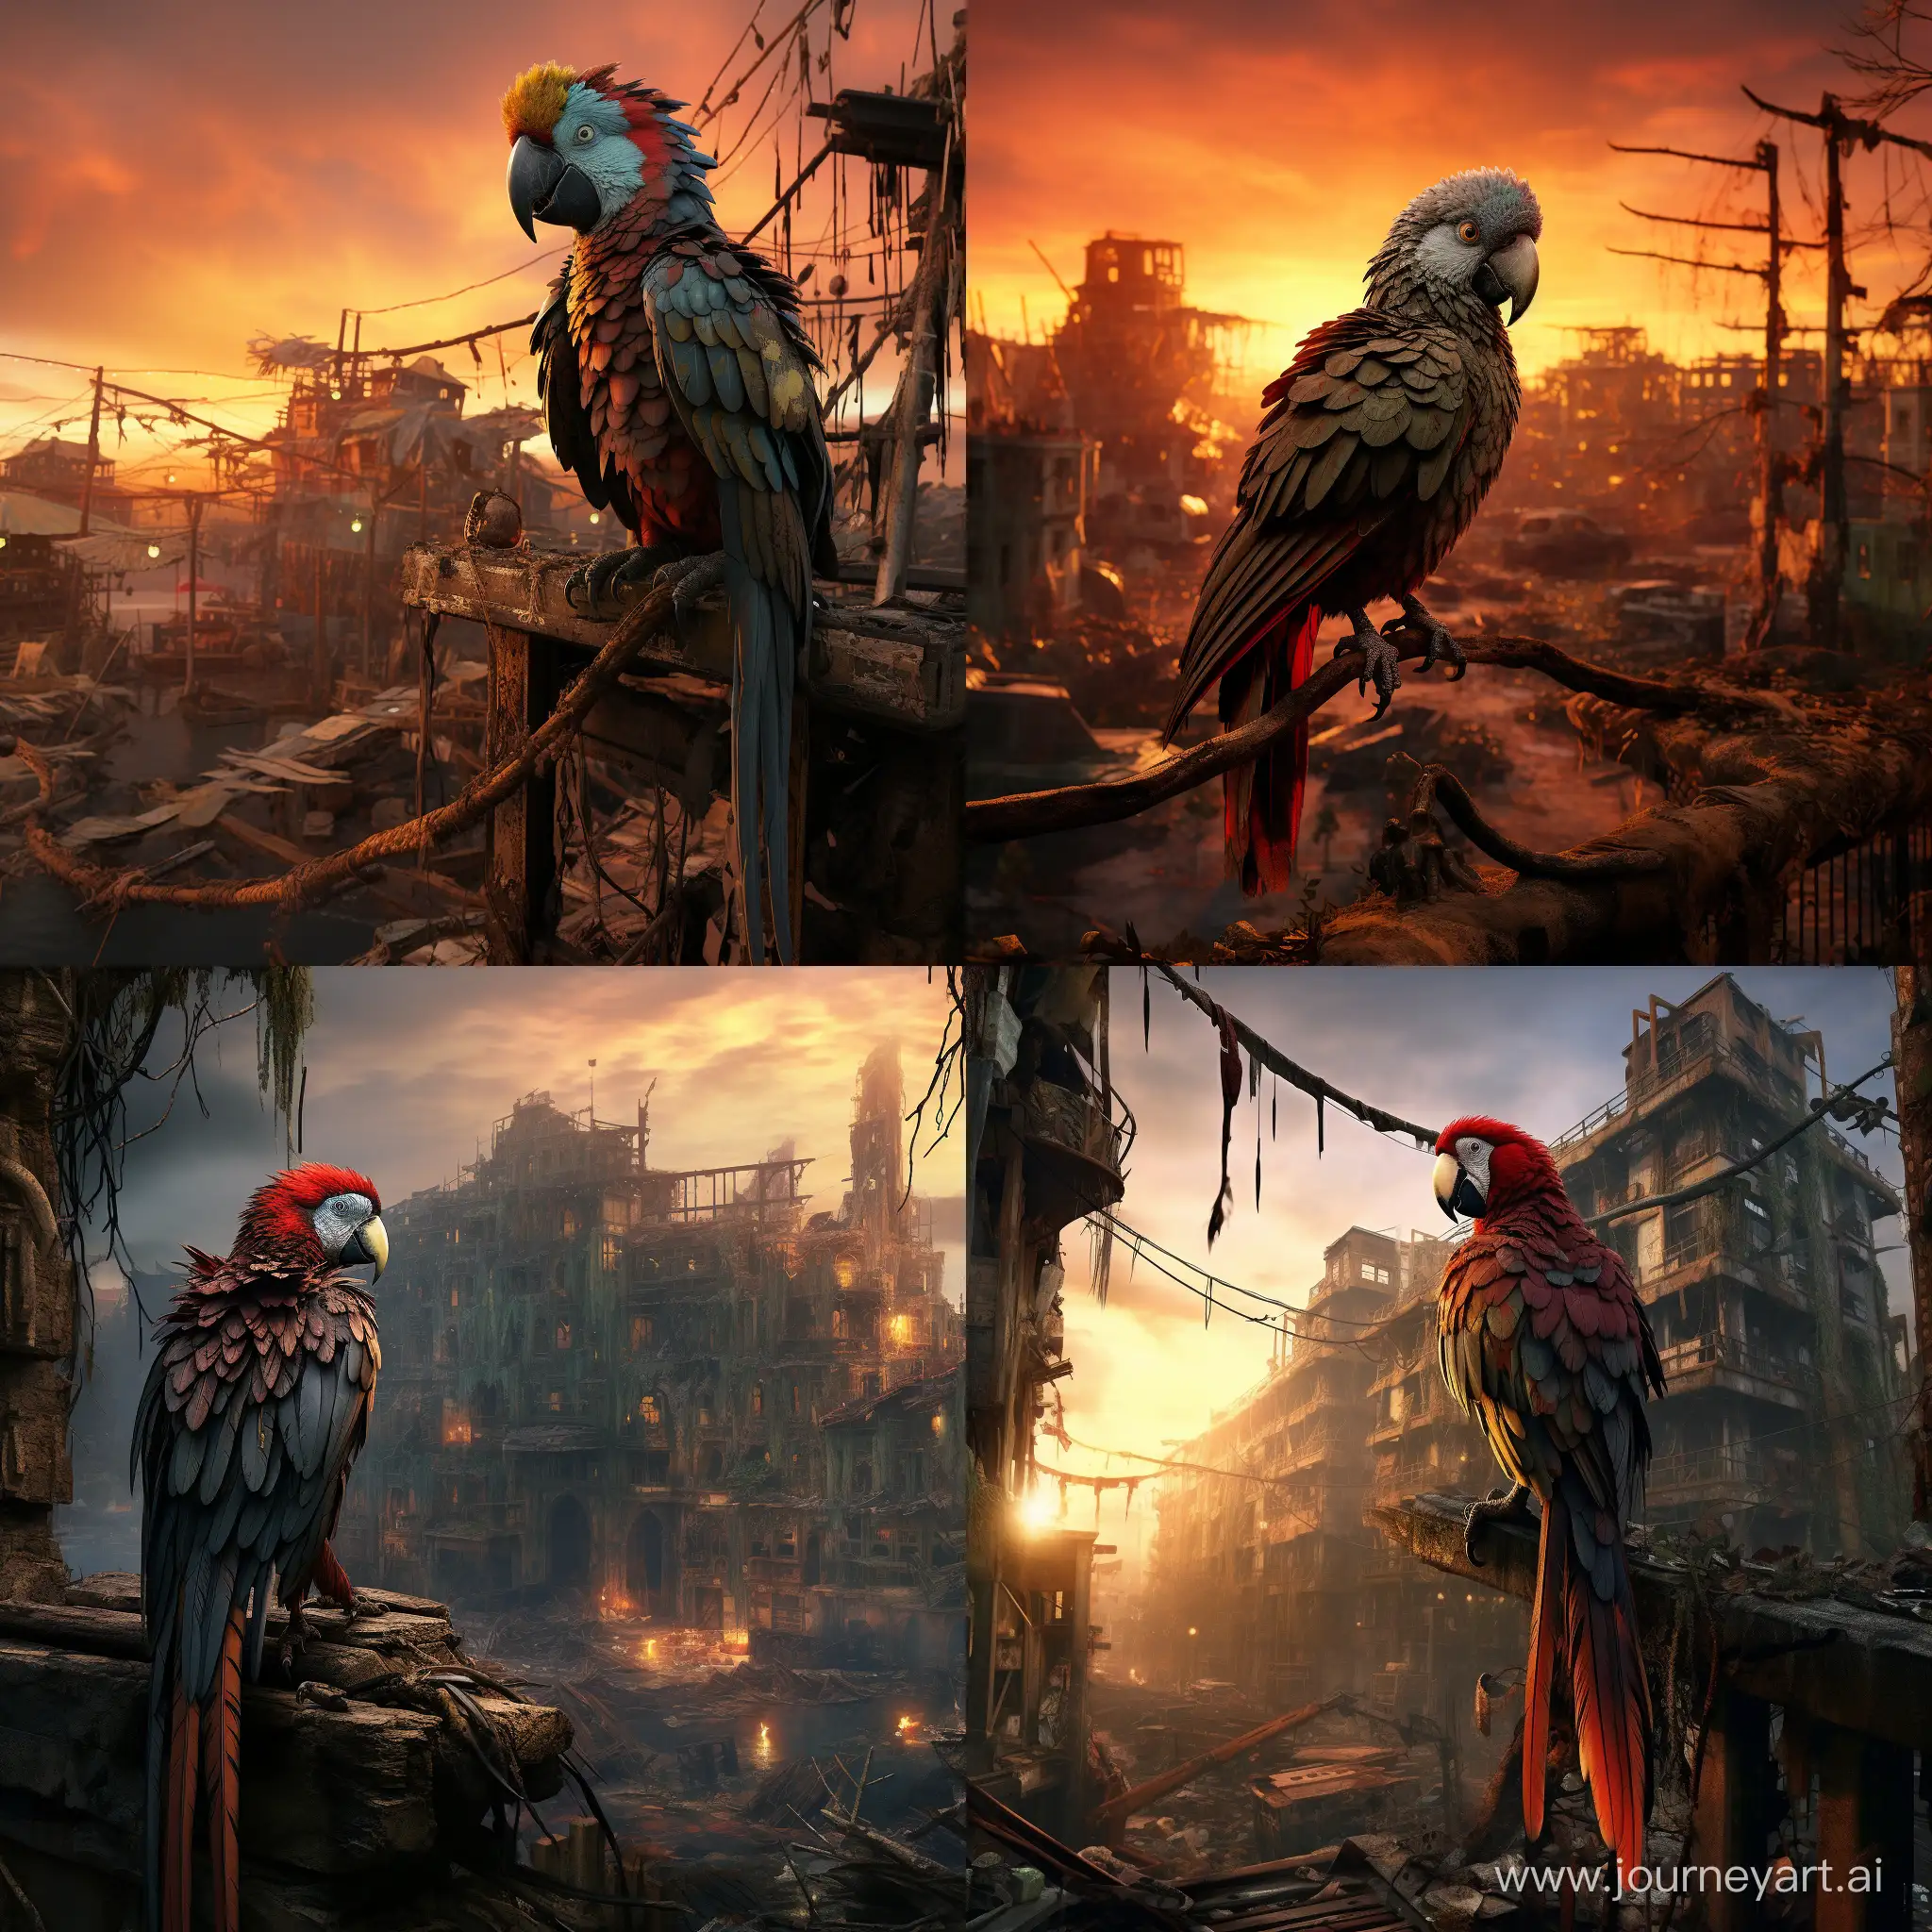 Lonely-Parrot-Dancing-Lombada-in-PostApocalyptic-City-at-Dawn